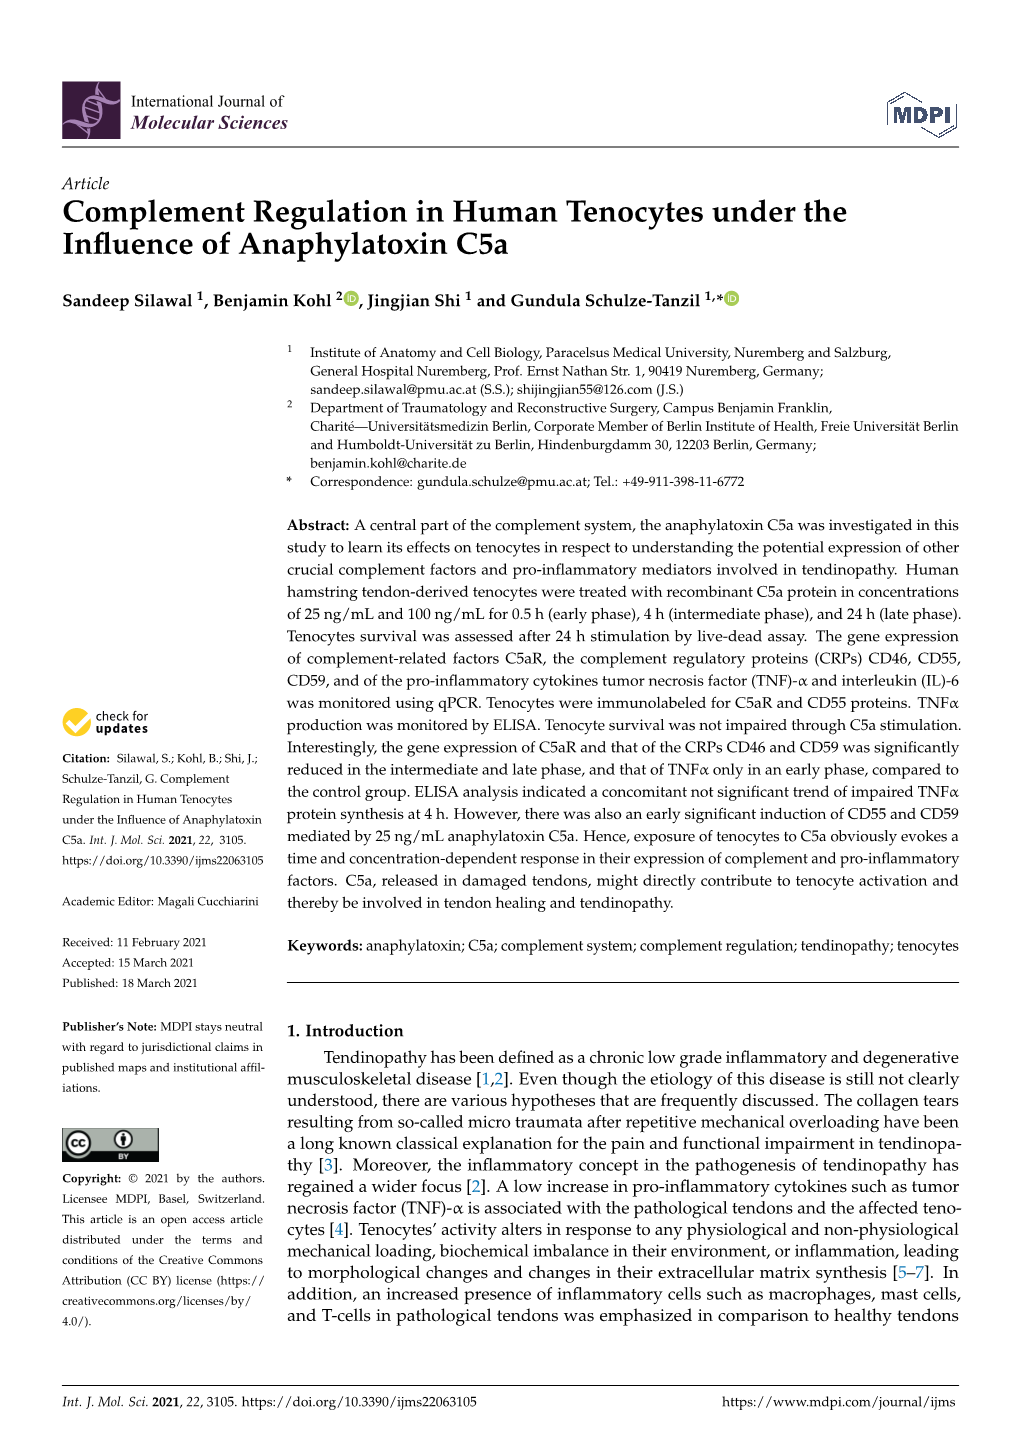 Complement Regulation in Human Tenocytes Under the Influence of Anaphylatoxin